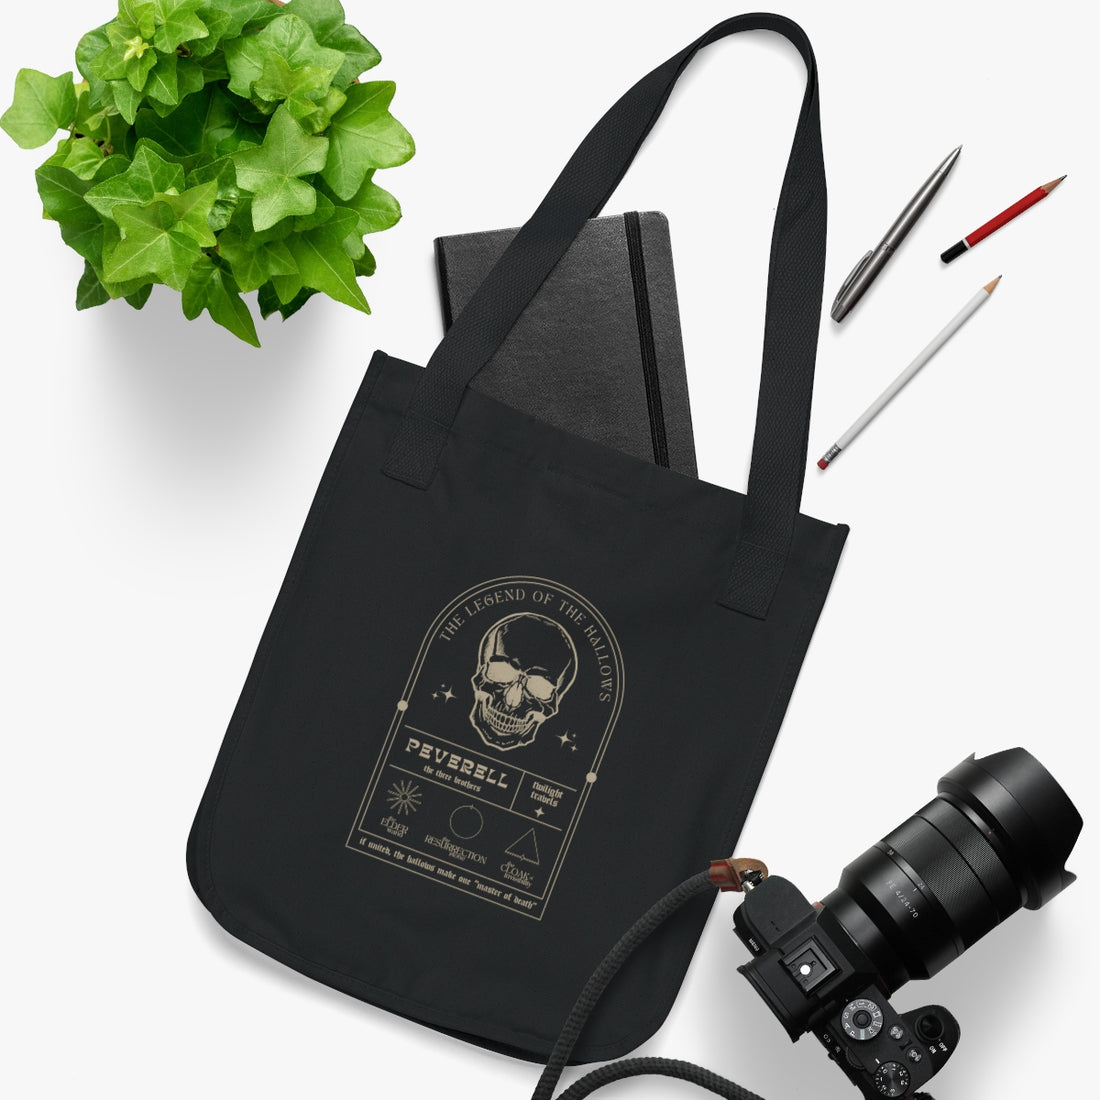 Legend of the Hallows Tote